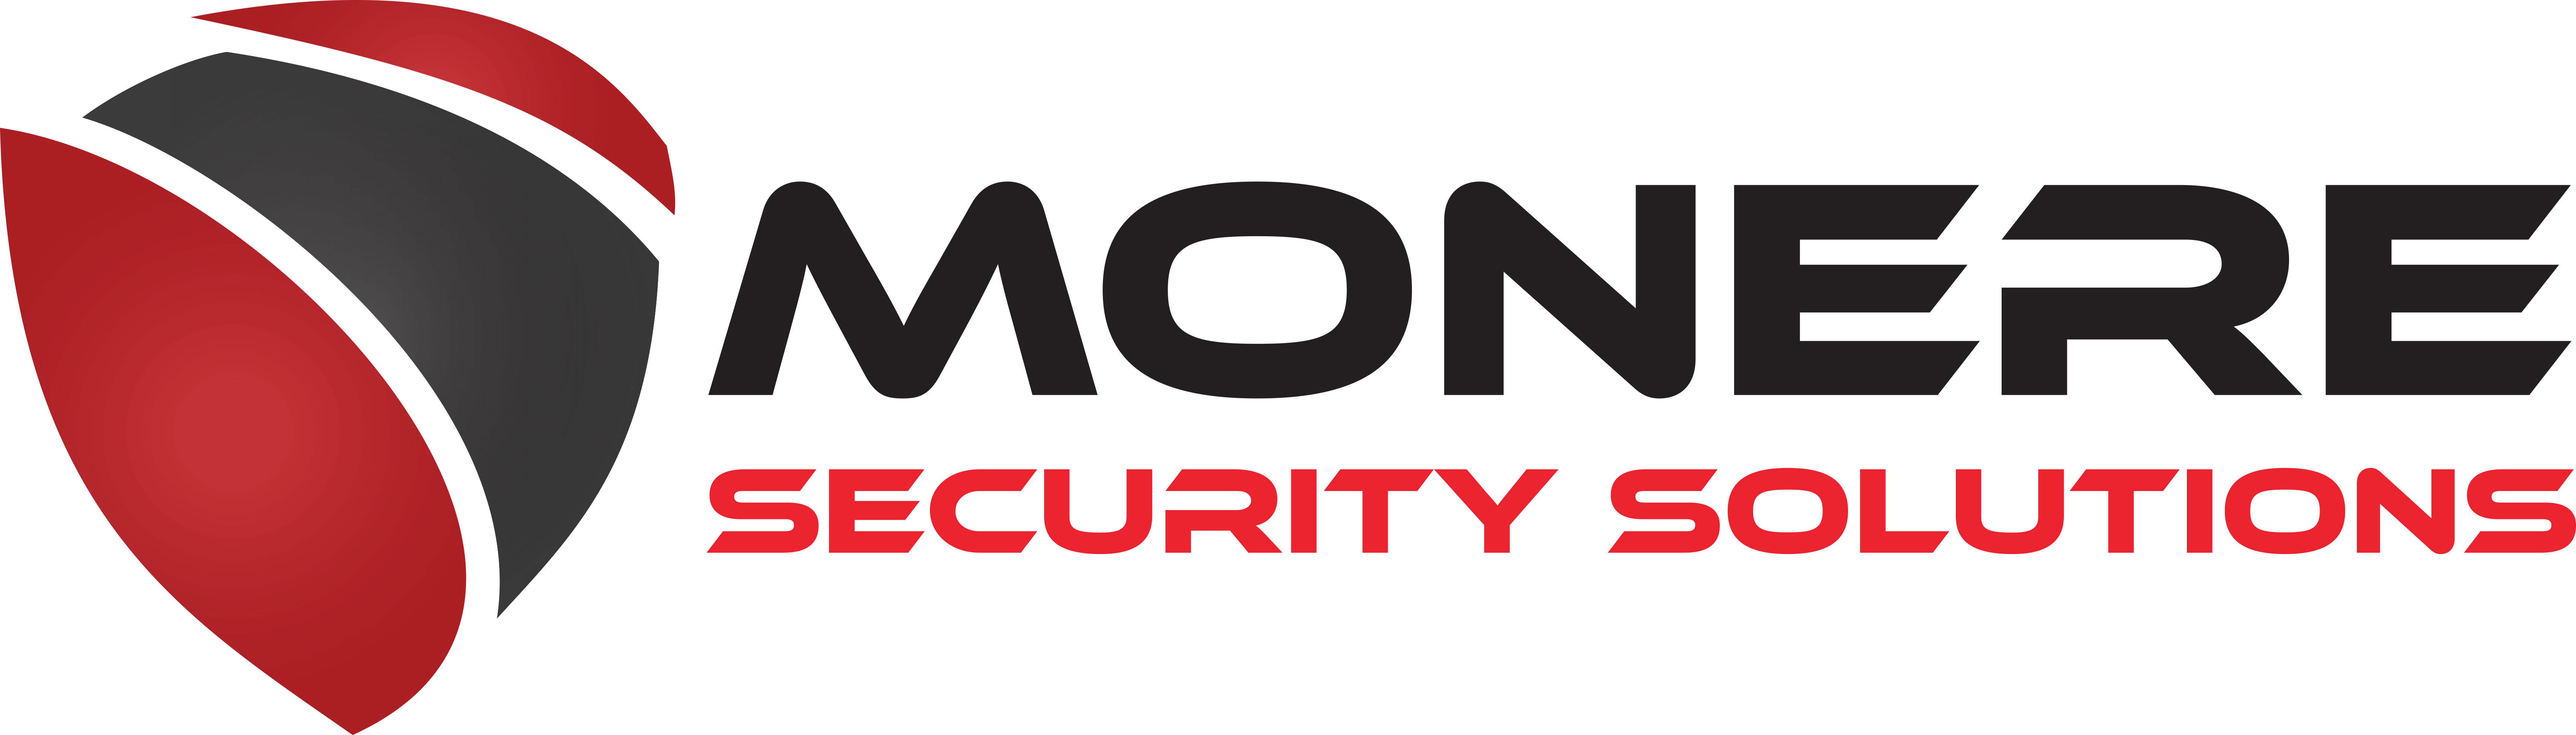 Monere Security Solutions